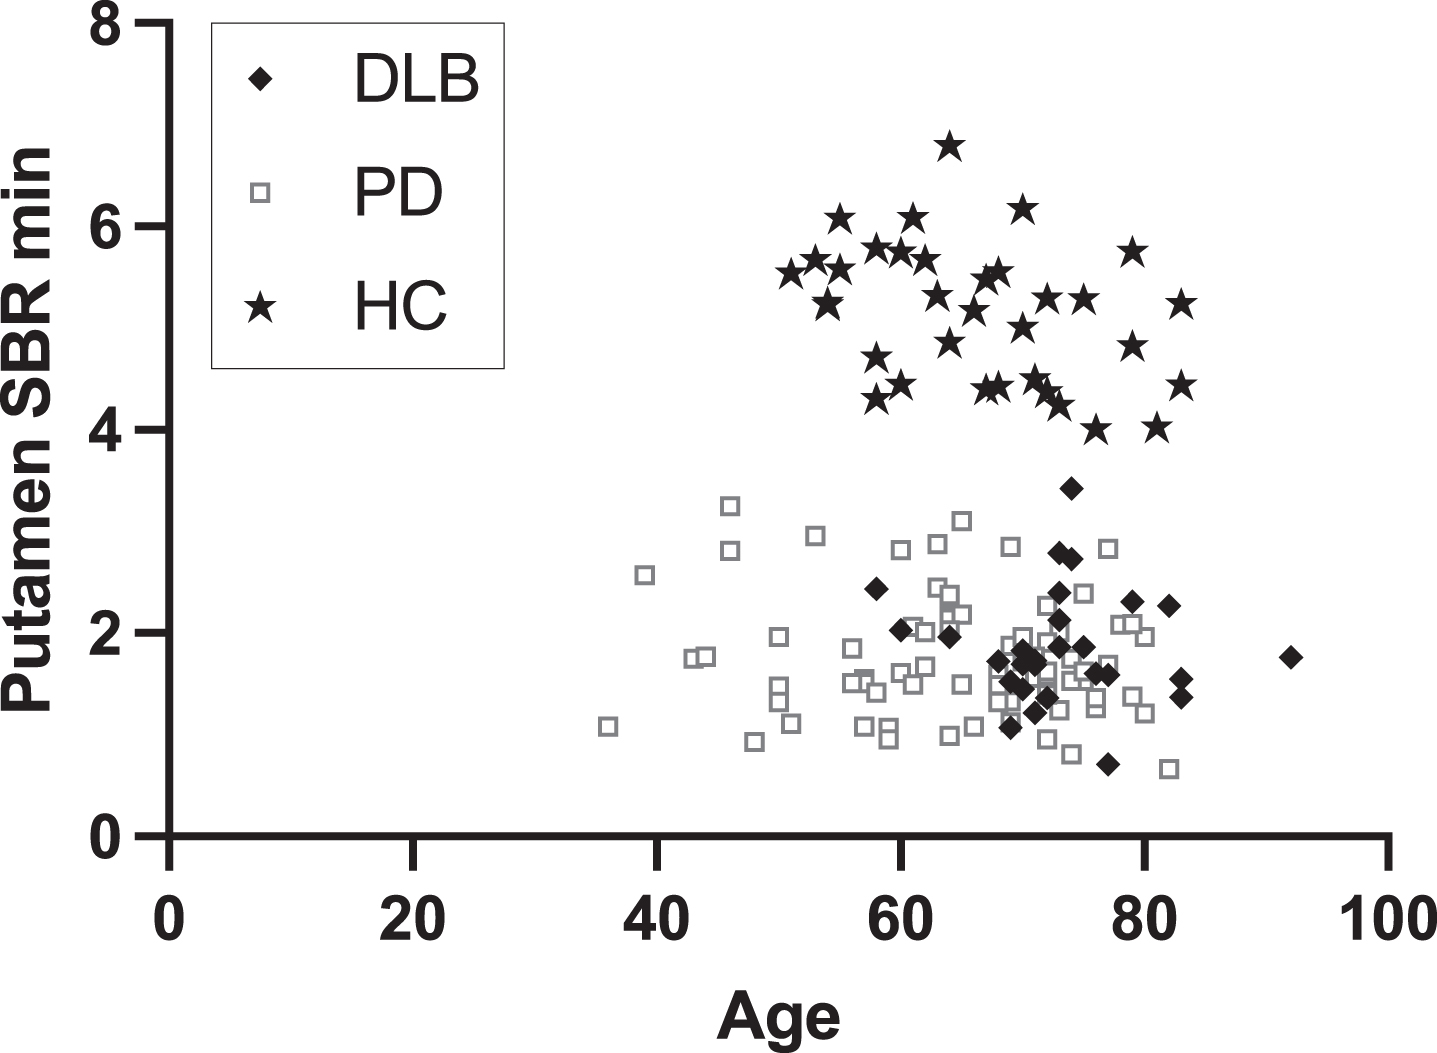 Distribution of most affected putamen [18F]-FE-PE2I specific binding ratio (SBR) and age in DLB patients, PD patients, and controls.